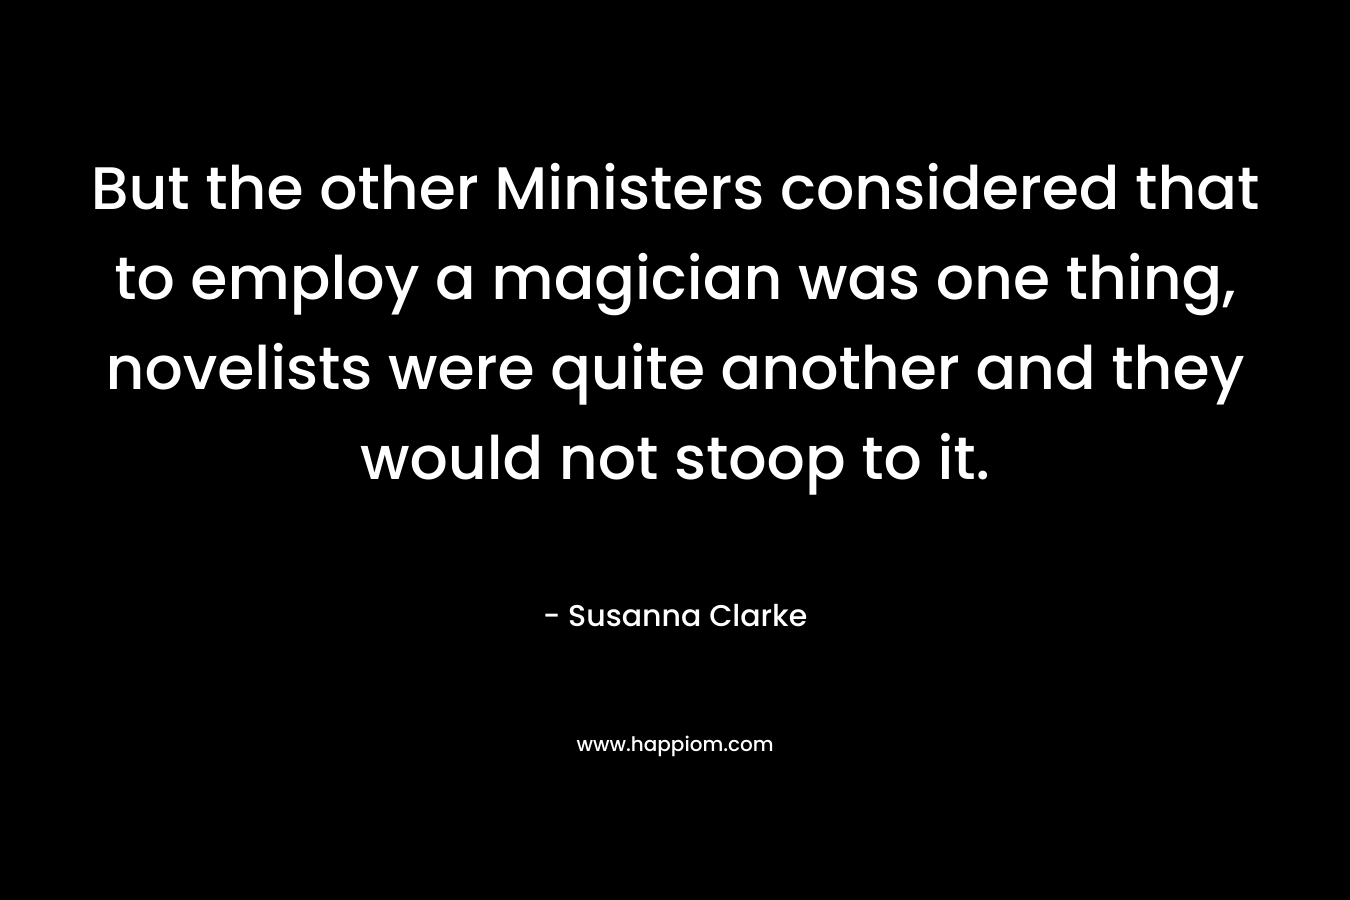 But the other Ministers considered that to employ a magician was one thing, novelists were quite another and they would not stoop to it.